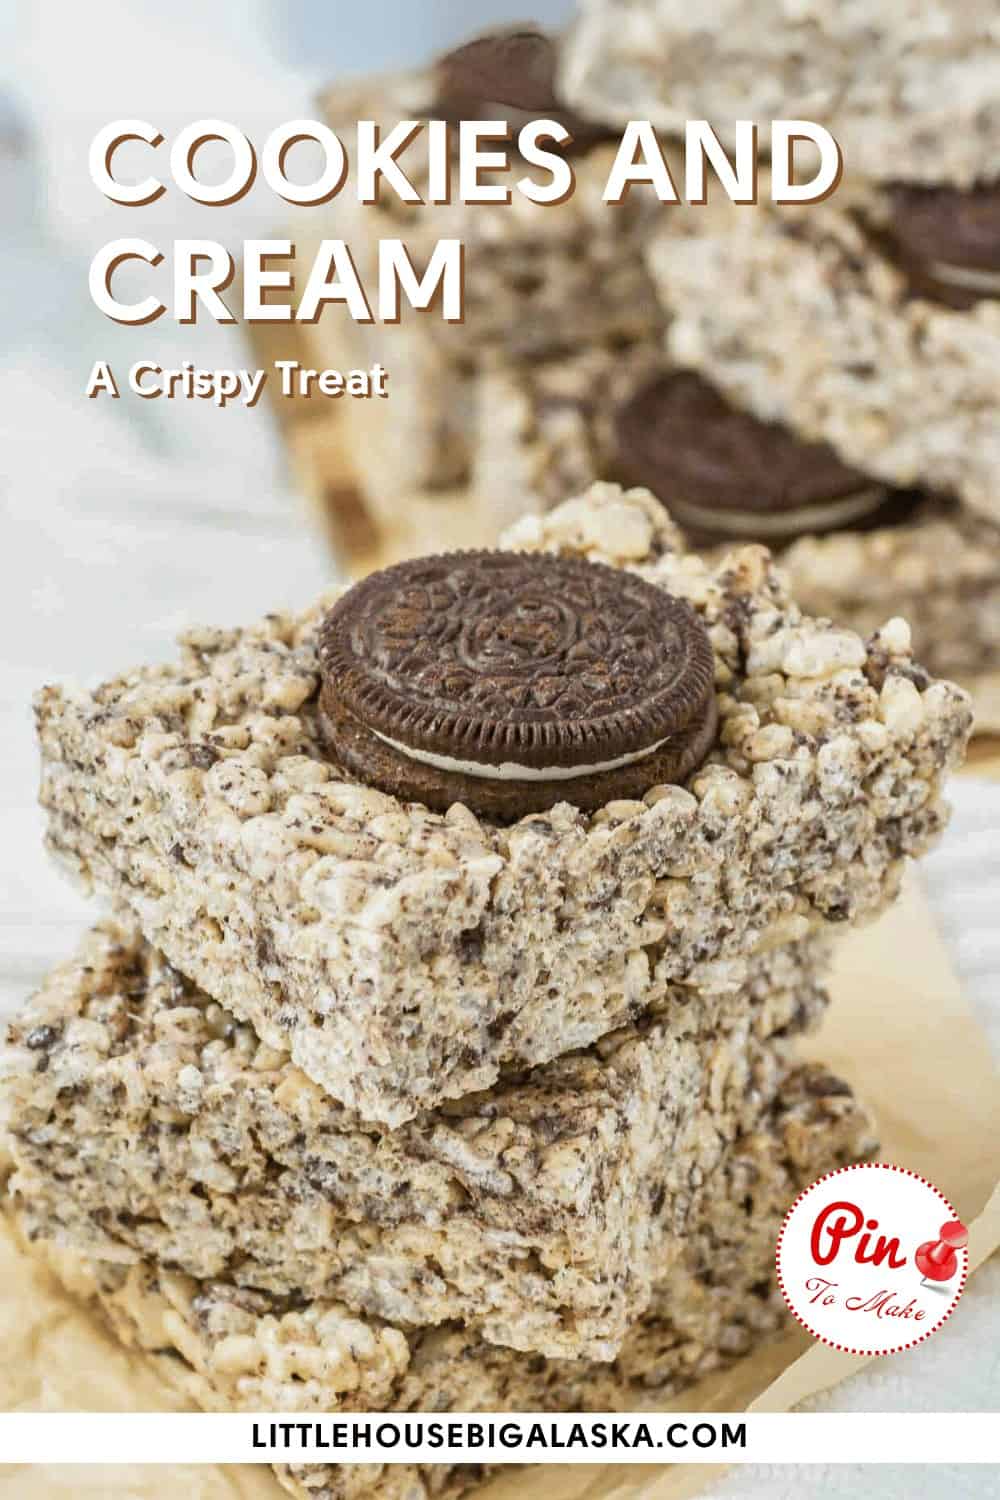 Caption: "cookies and cream crispy treats—featuring a whole cookie on top.